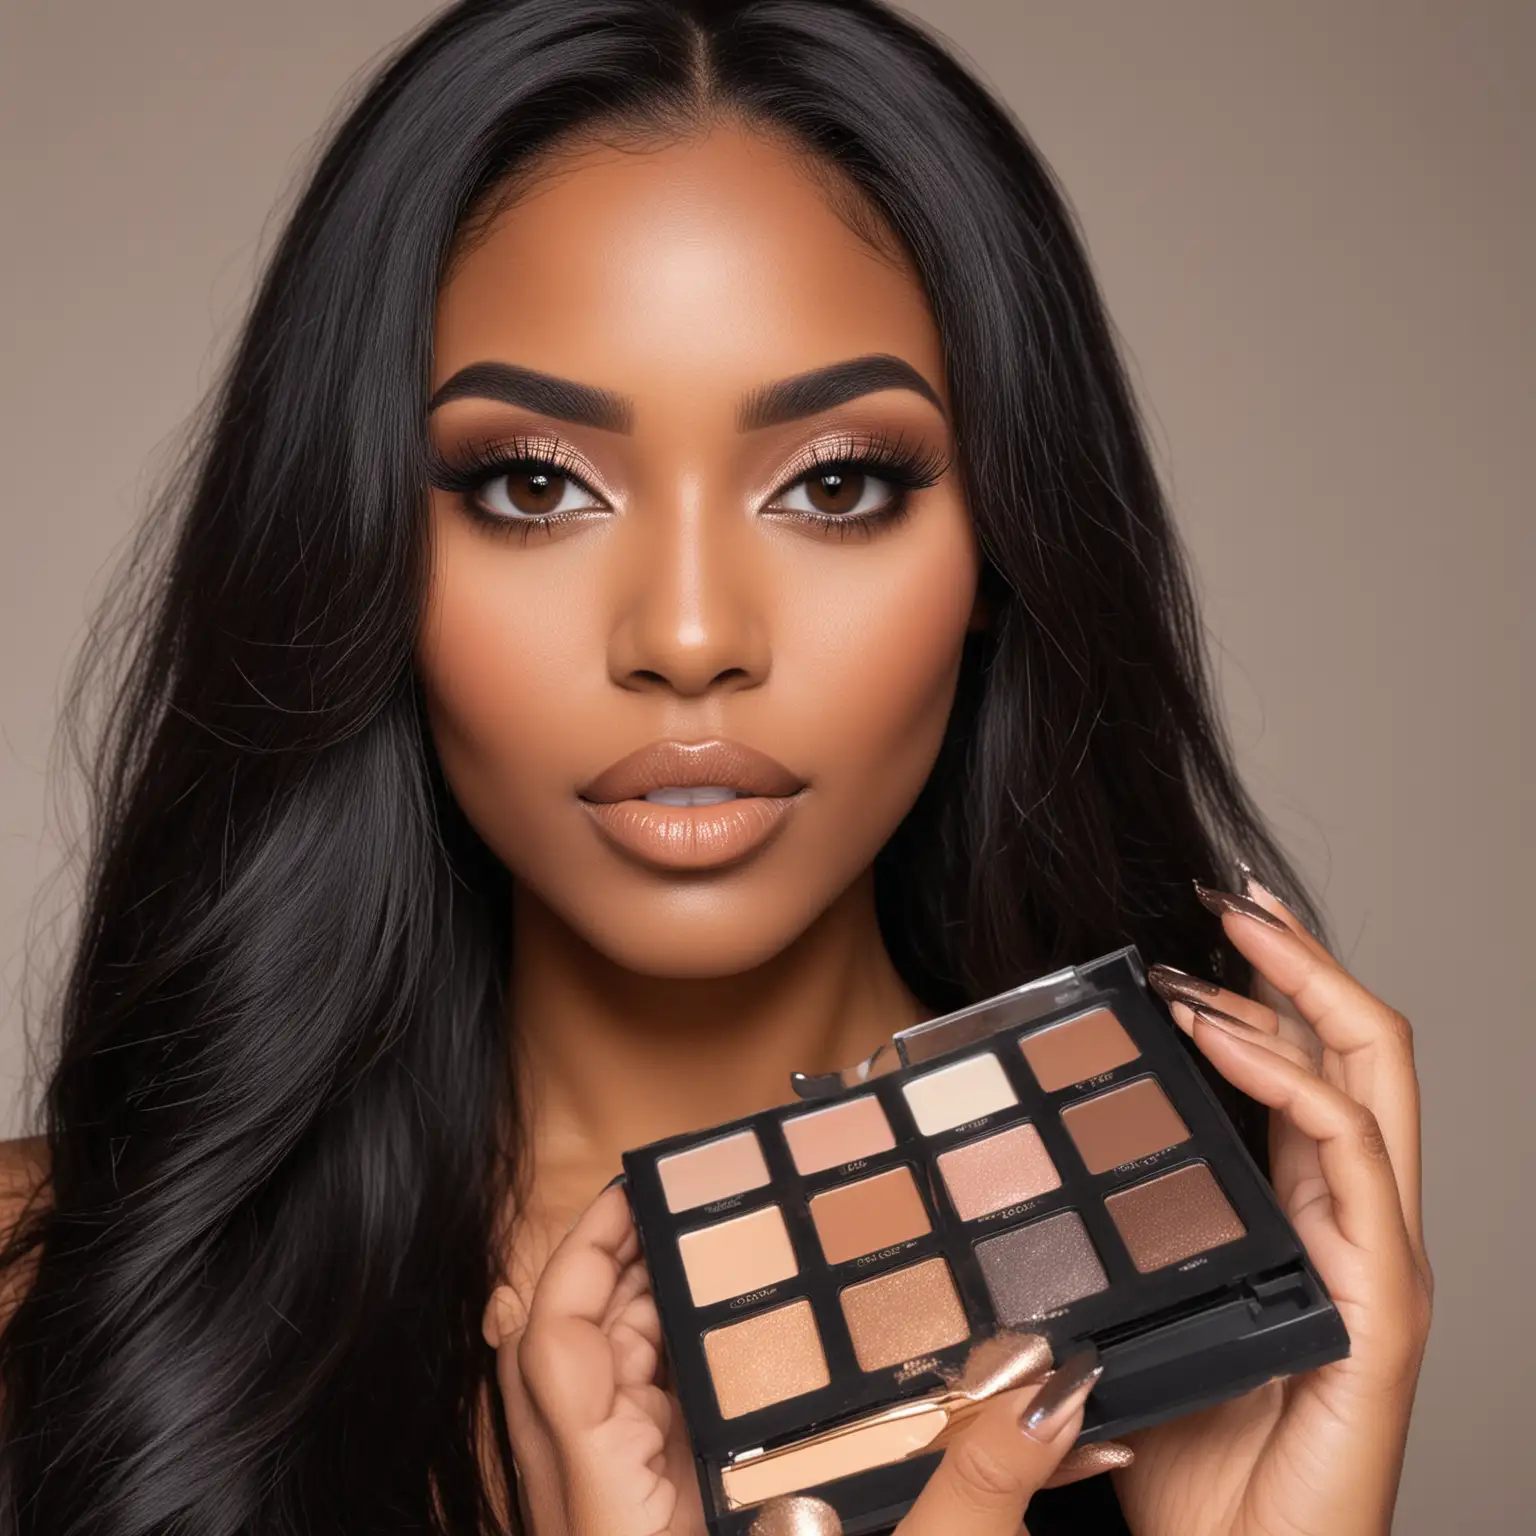 Stunning African American Woman in Glamorous Makeup Holding Makeup Palette